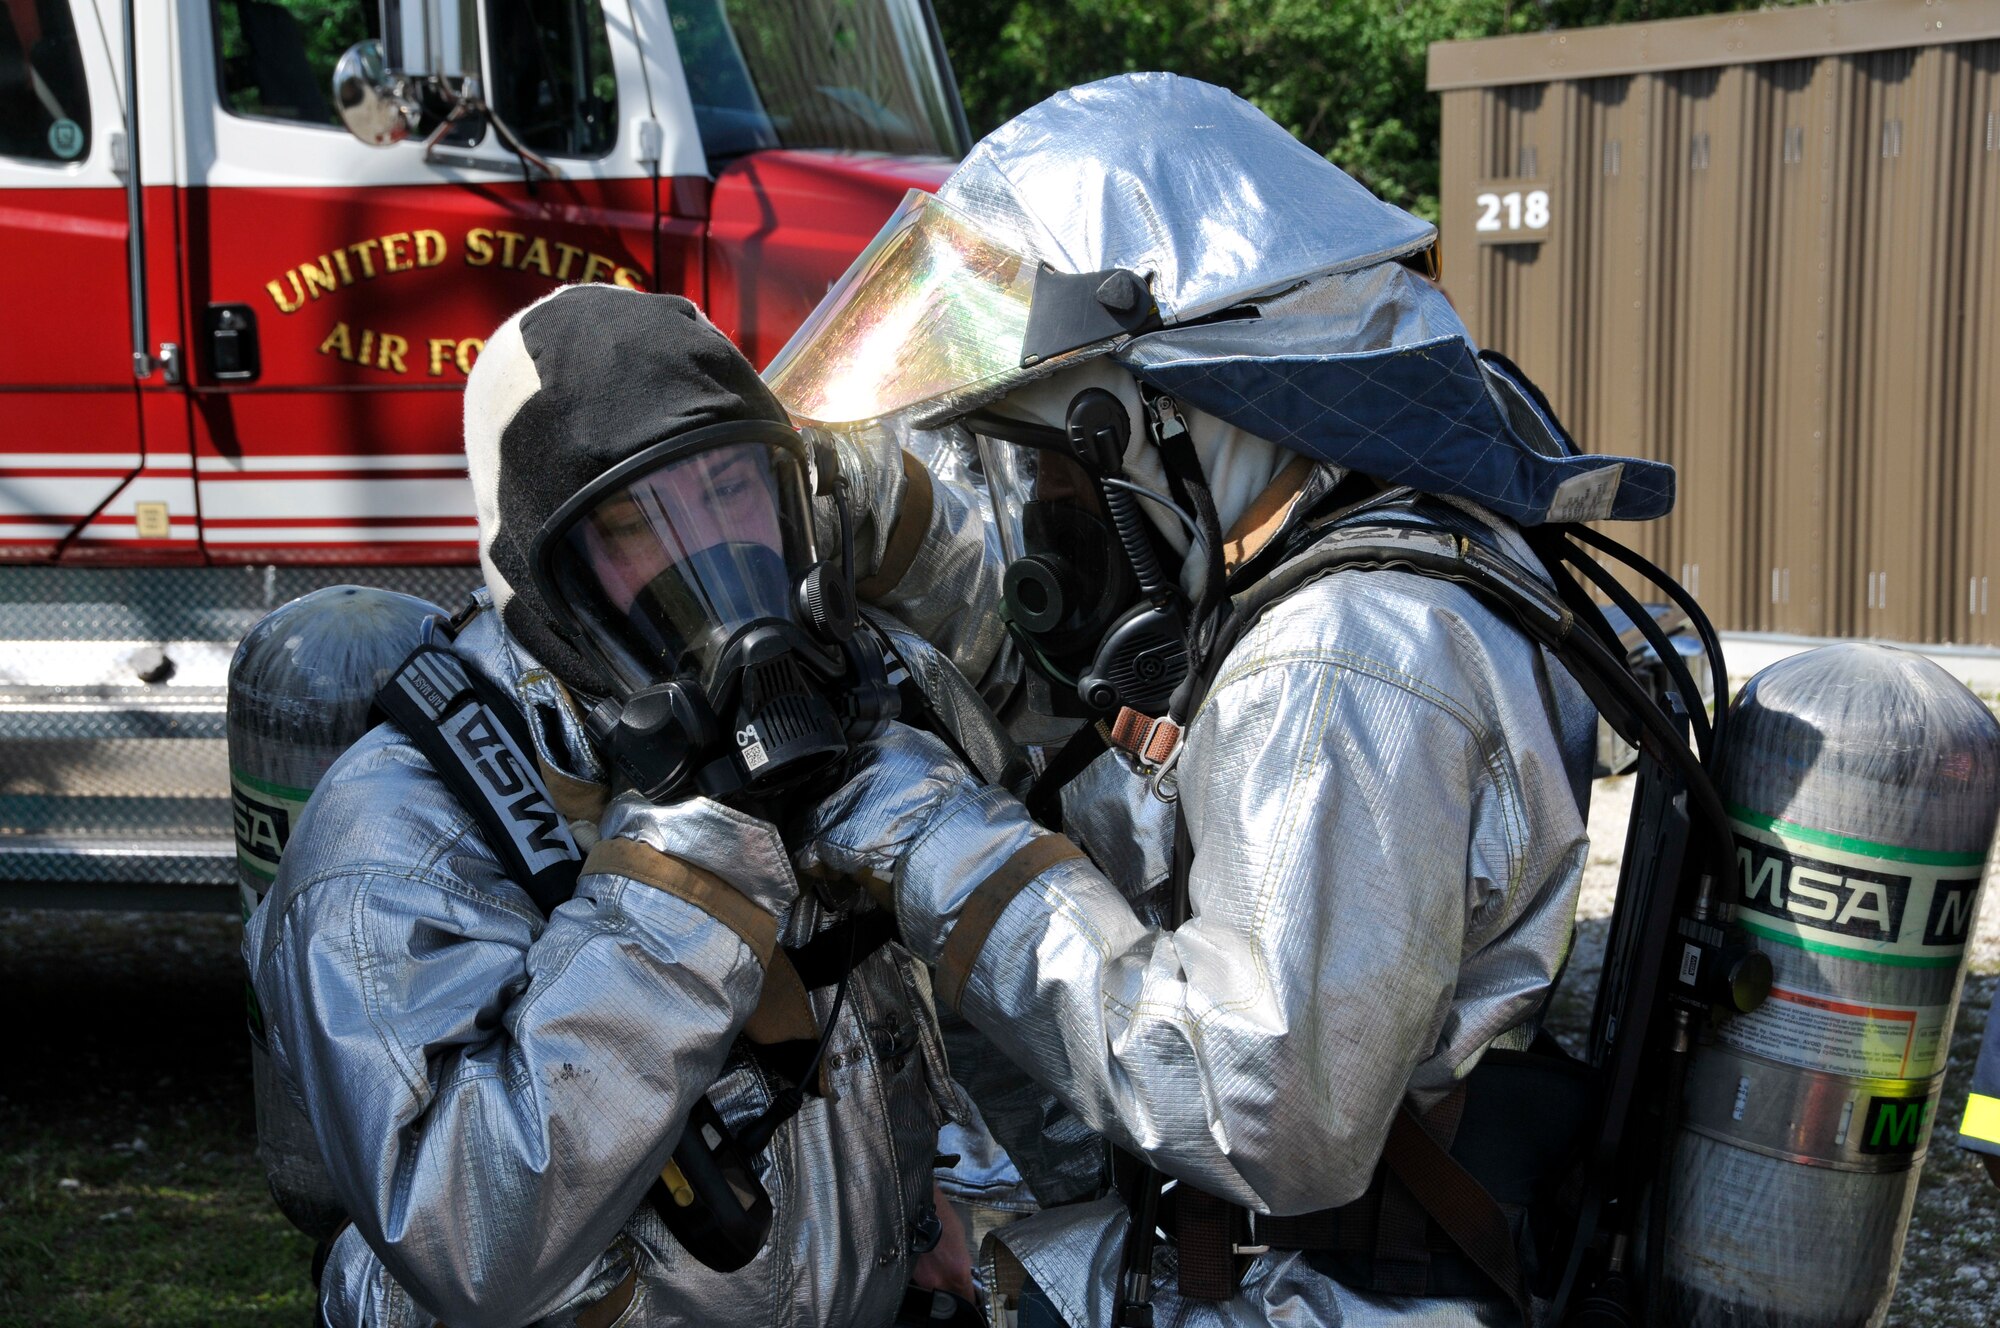 Members of Homestead Air Reserve Base, Fla.’s Fire Department adjust each other’s fire proximity suits, also known as bunker suits, prior to aircraft live fire training at Homestead ARB May 15. The aircraft live fire training consists of responding to the fire, setting up on the aircraft, deploying hose lines, and attacking and extinguishing the fire. (U.S. Air Force photo/Senior Airman Nicholas Caceres)